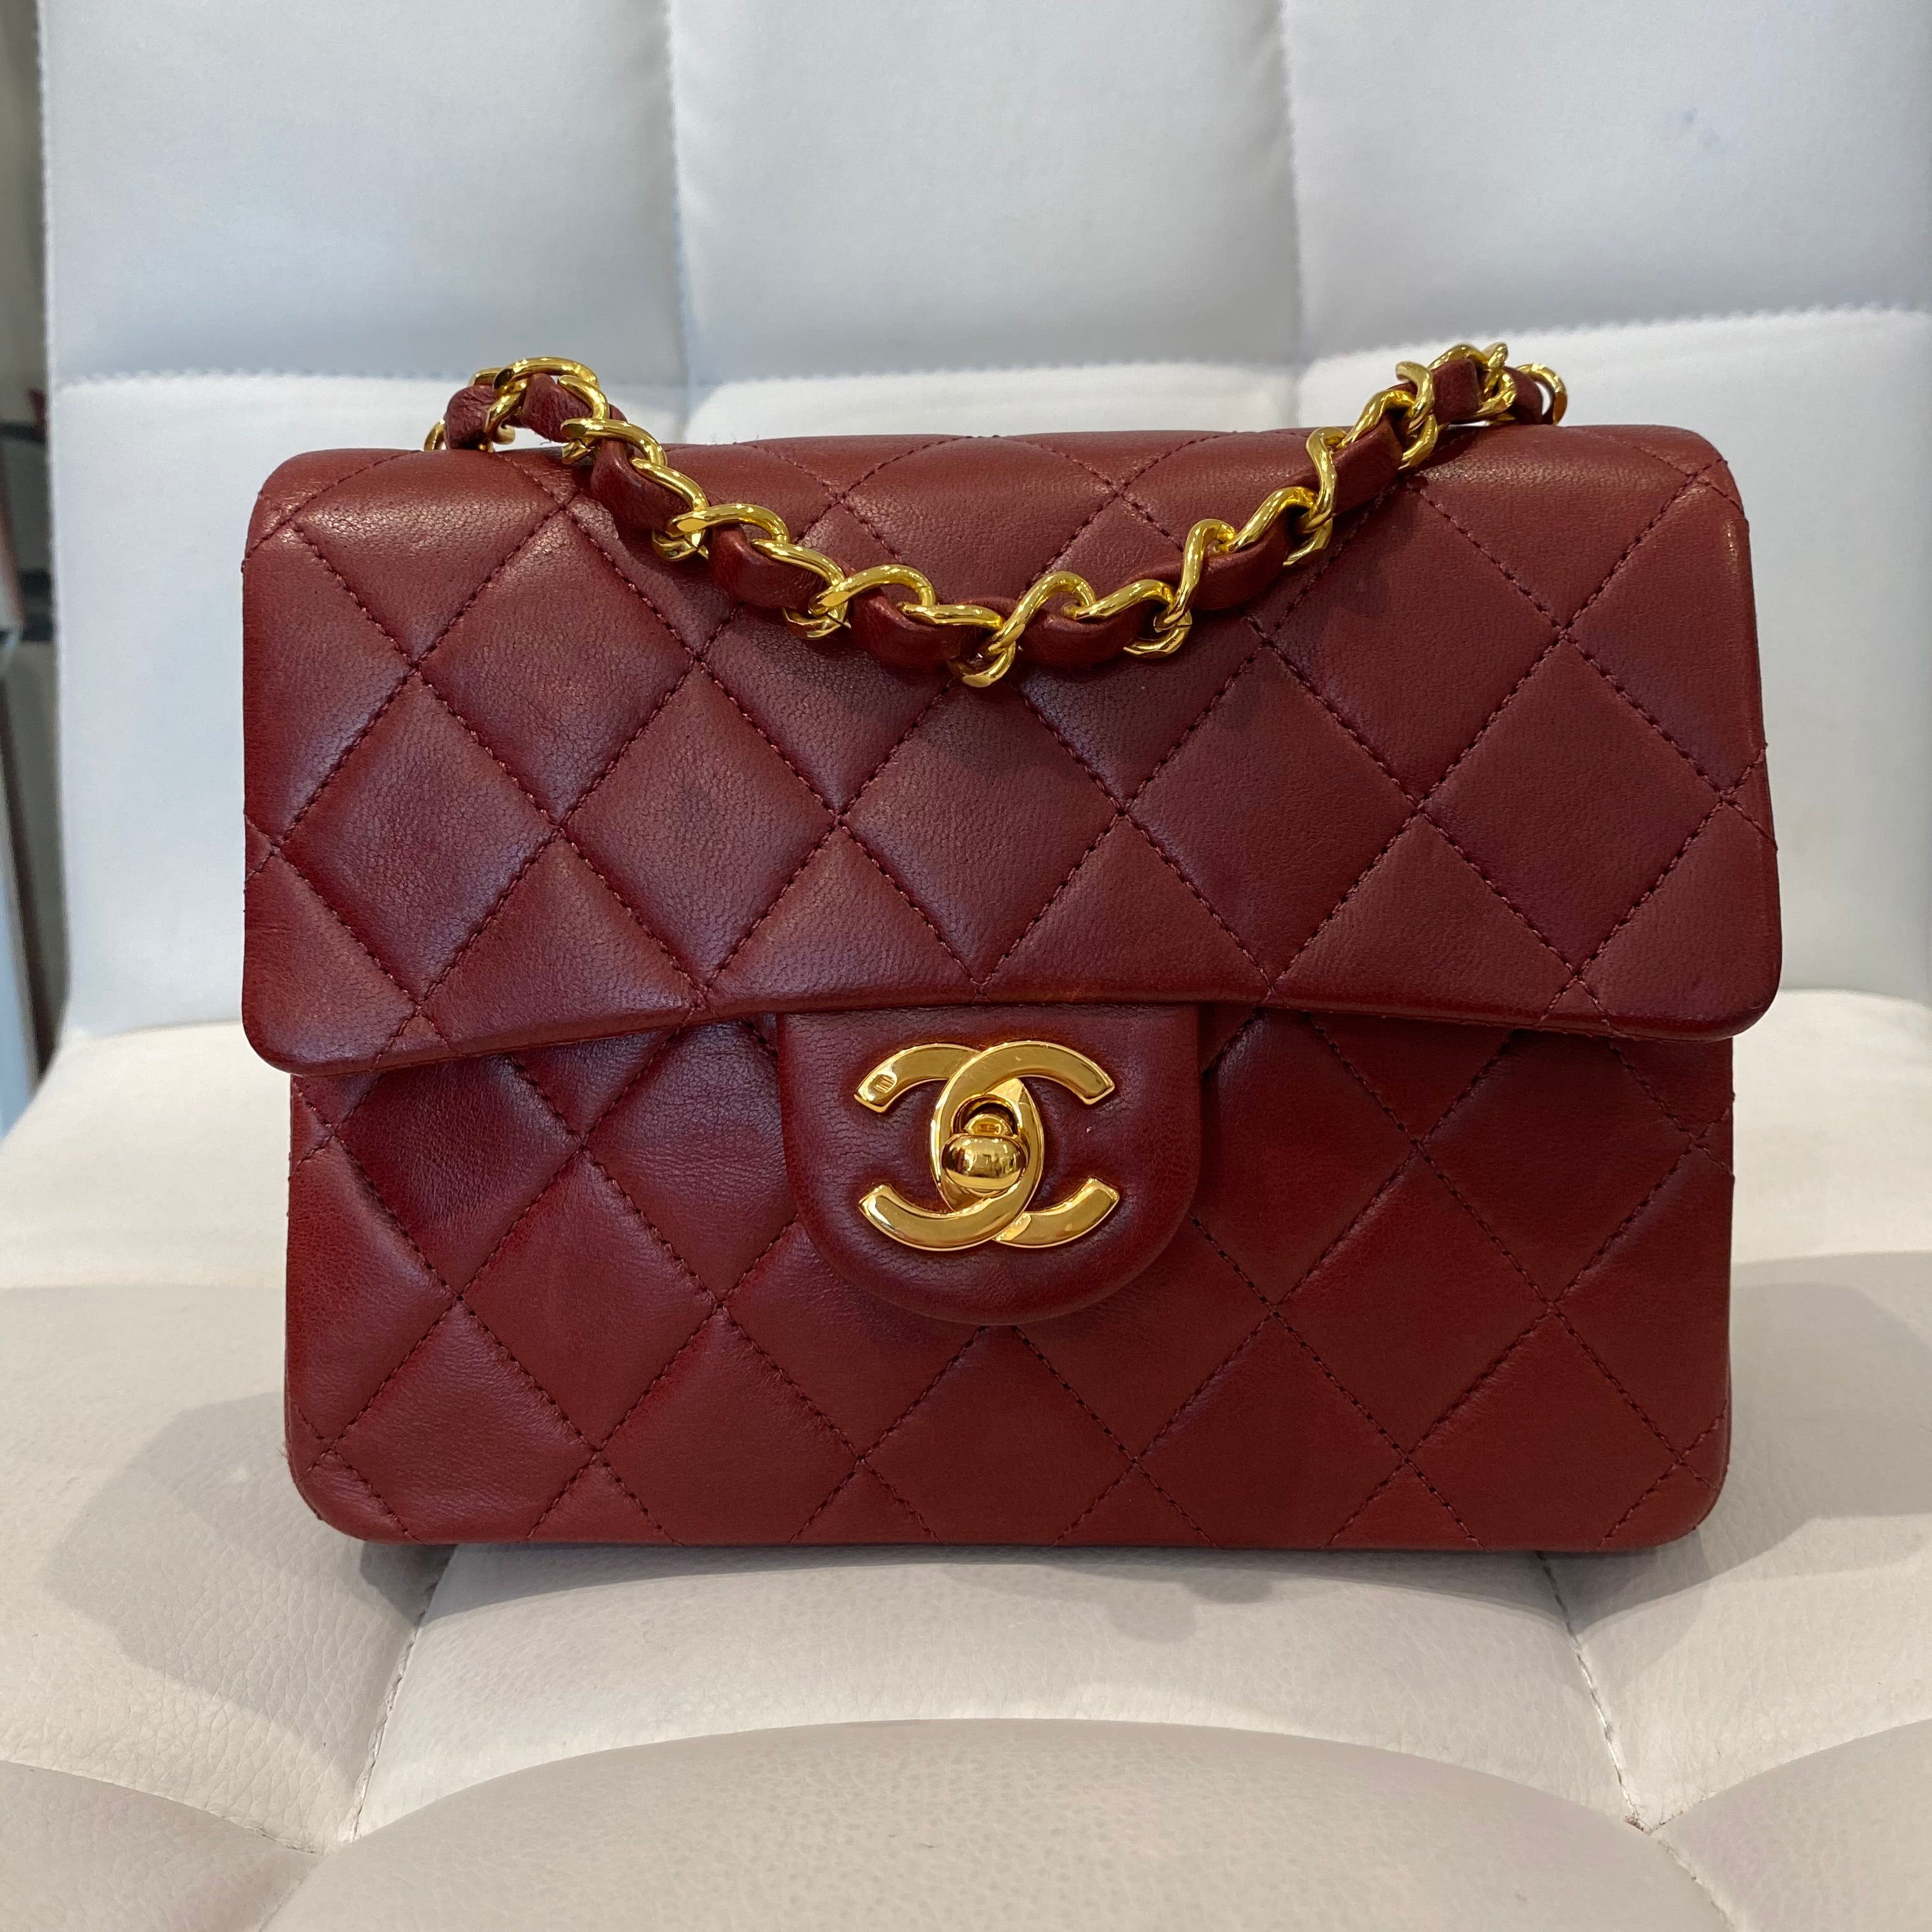 Chanel Red Quilted Caviar Leather Mini Rectangle Flap Bag at the best price